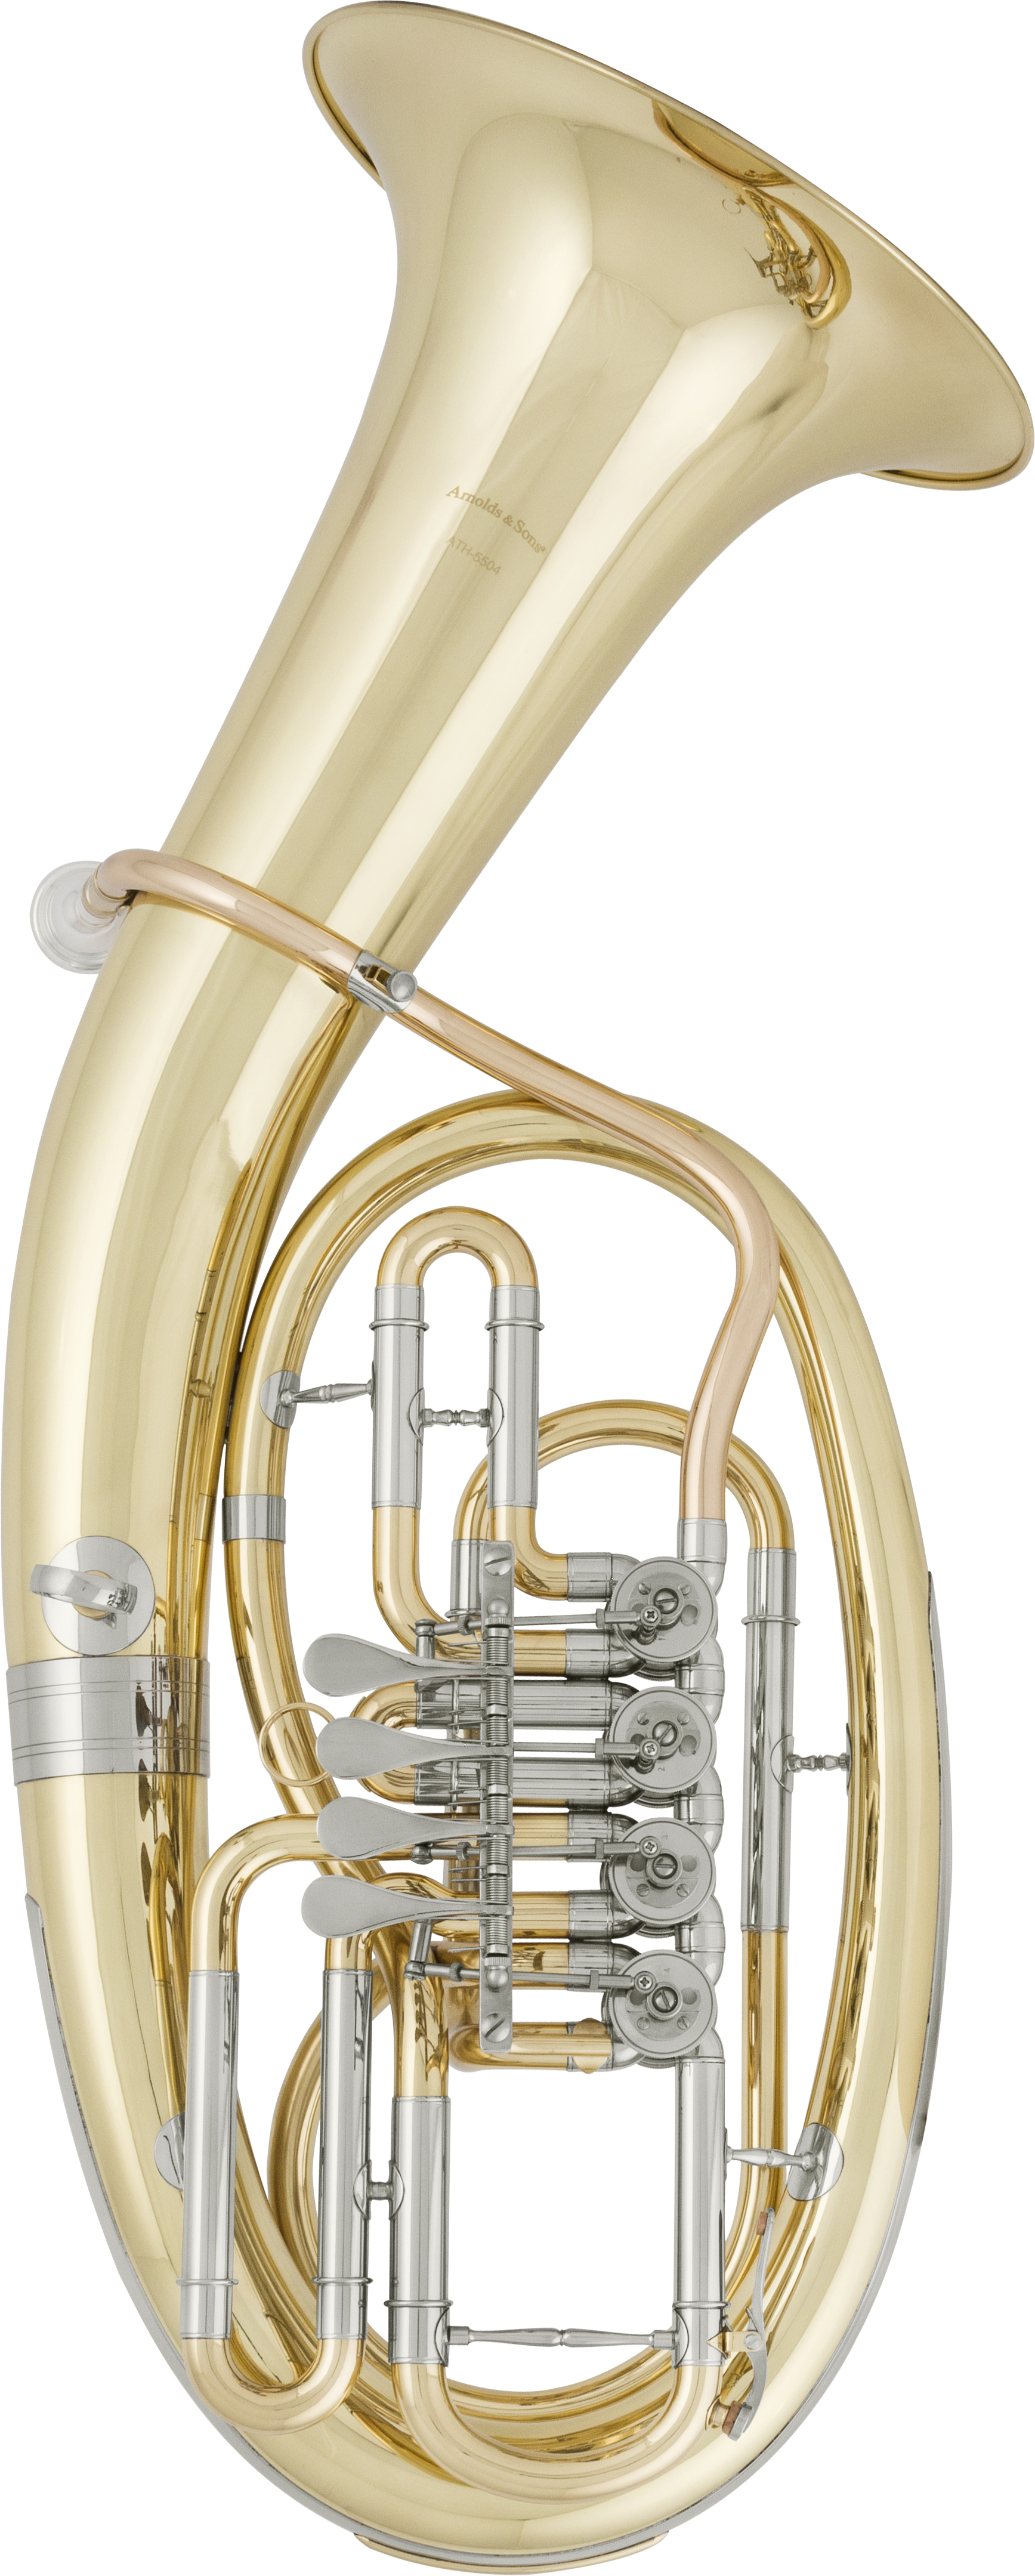 A&S Tenorhorn Modell  ATH-5504 4 Ventile, mit Etui